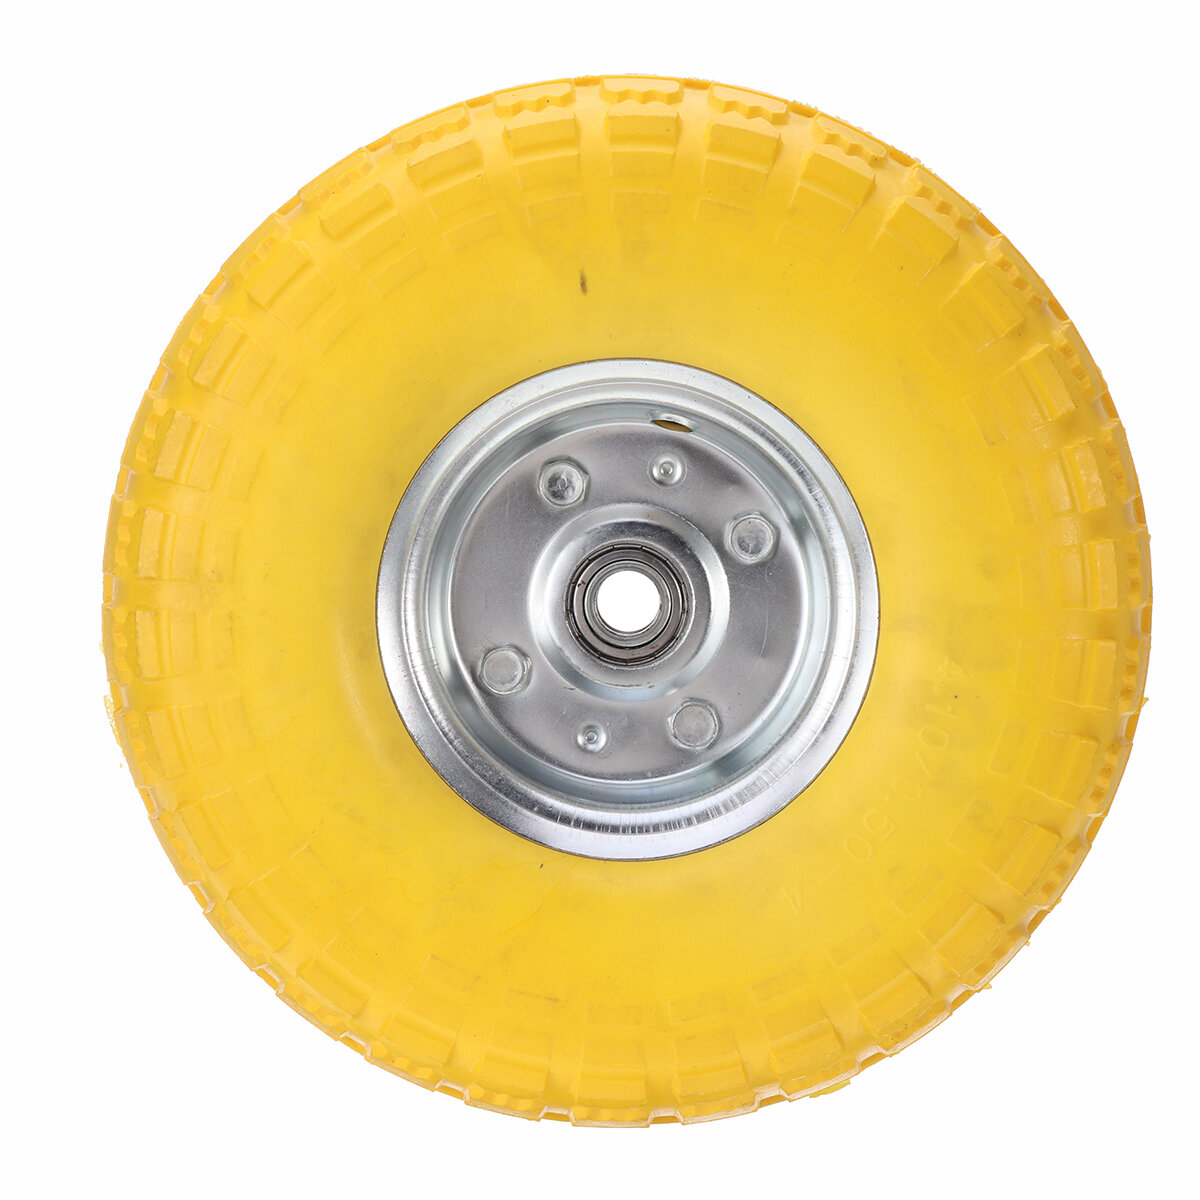 

10 Inch Wheelbarrow Tyre Puncture Proof Tubeless Barrow Trolley Cart Wheel Spare Replacement Part